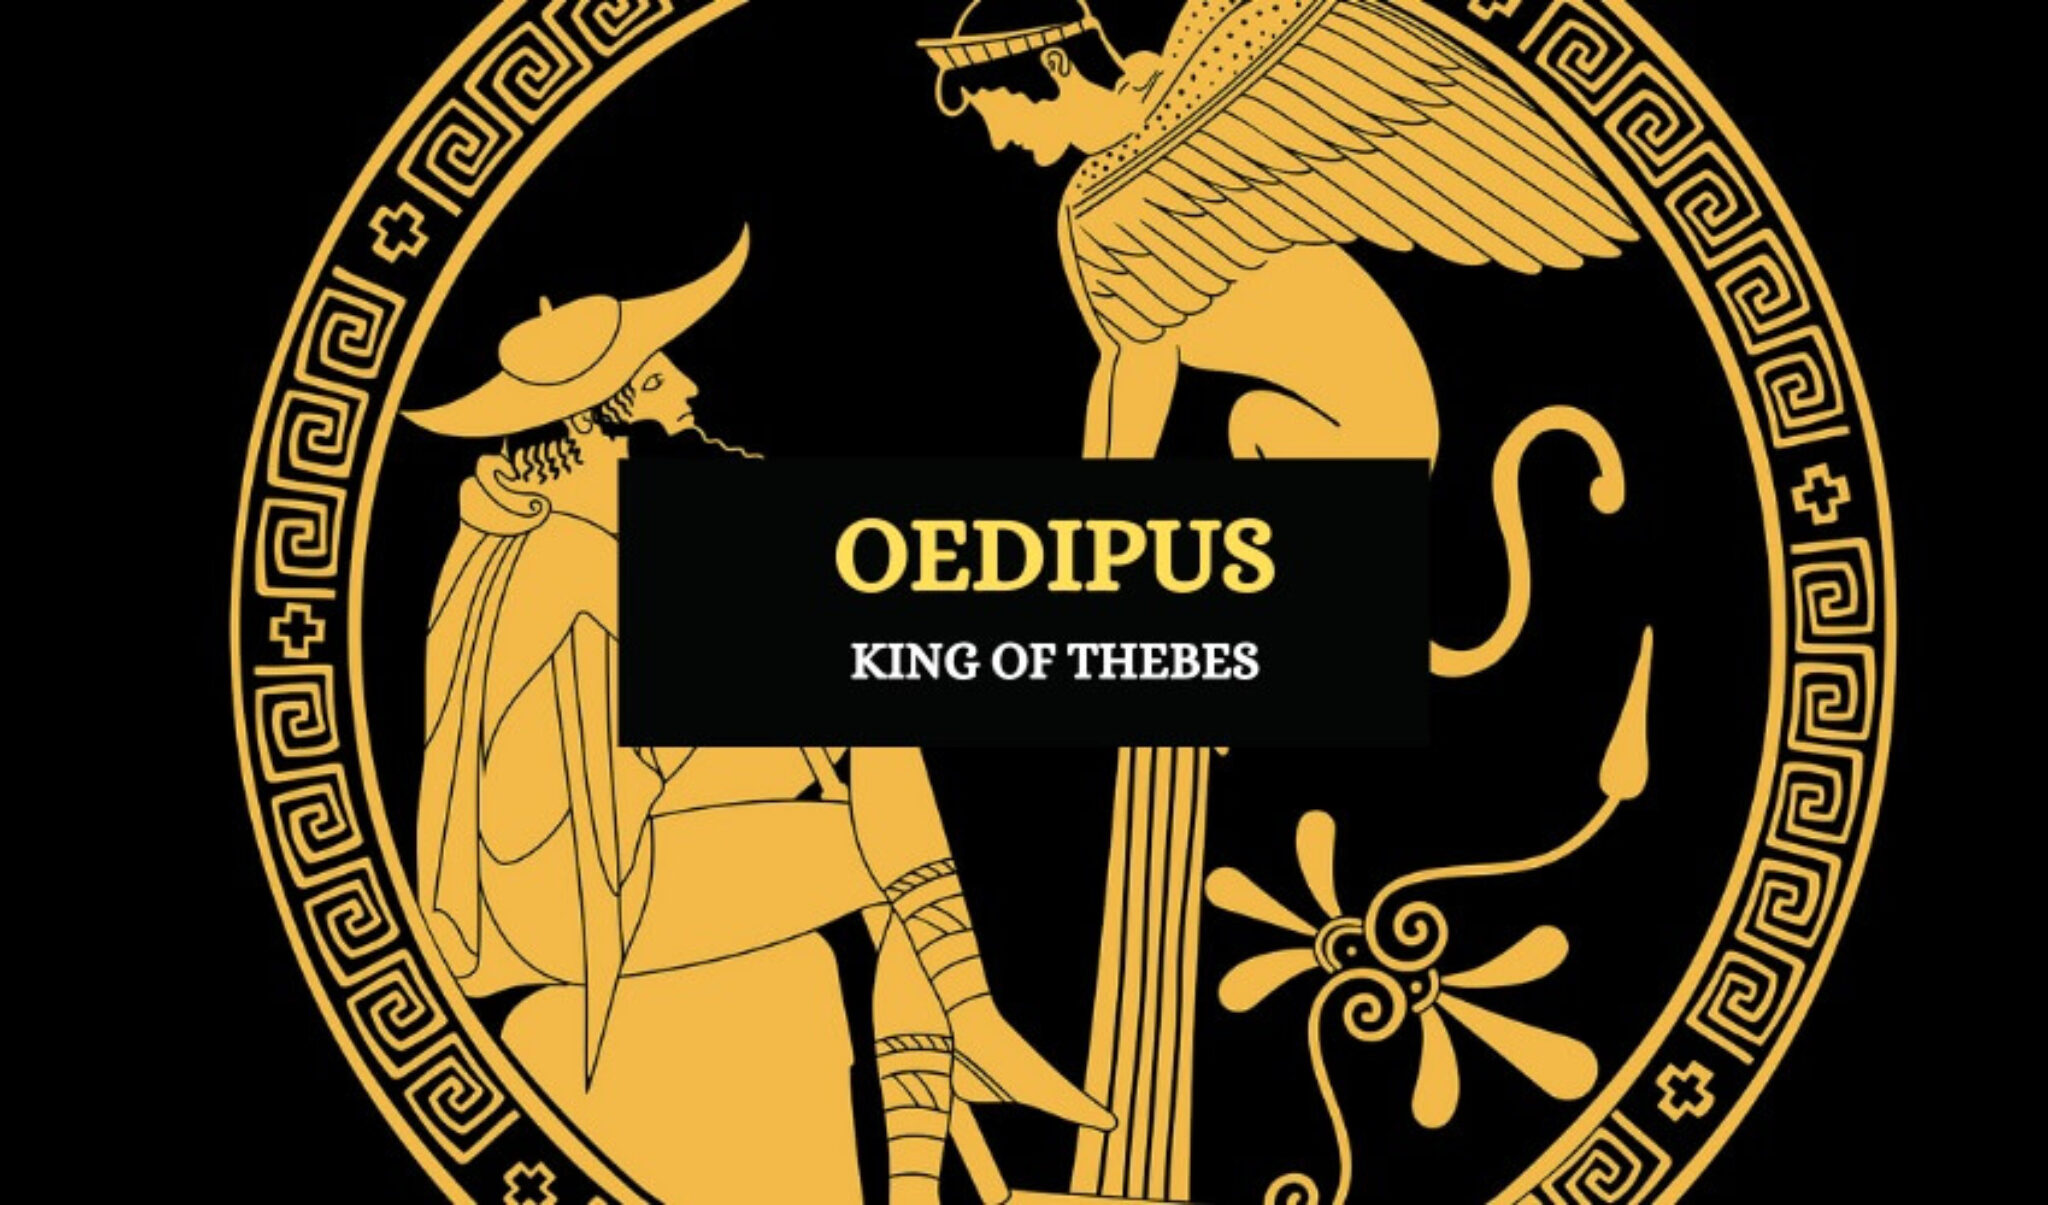 oedipus the king catharsis essays